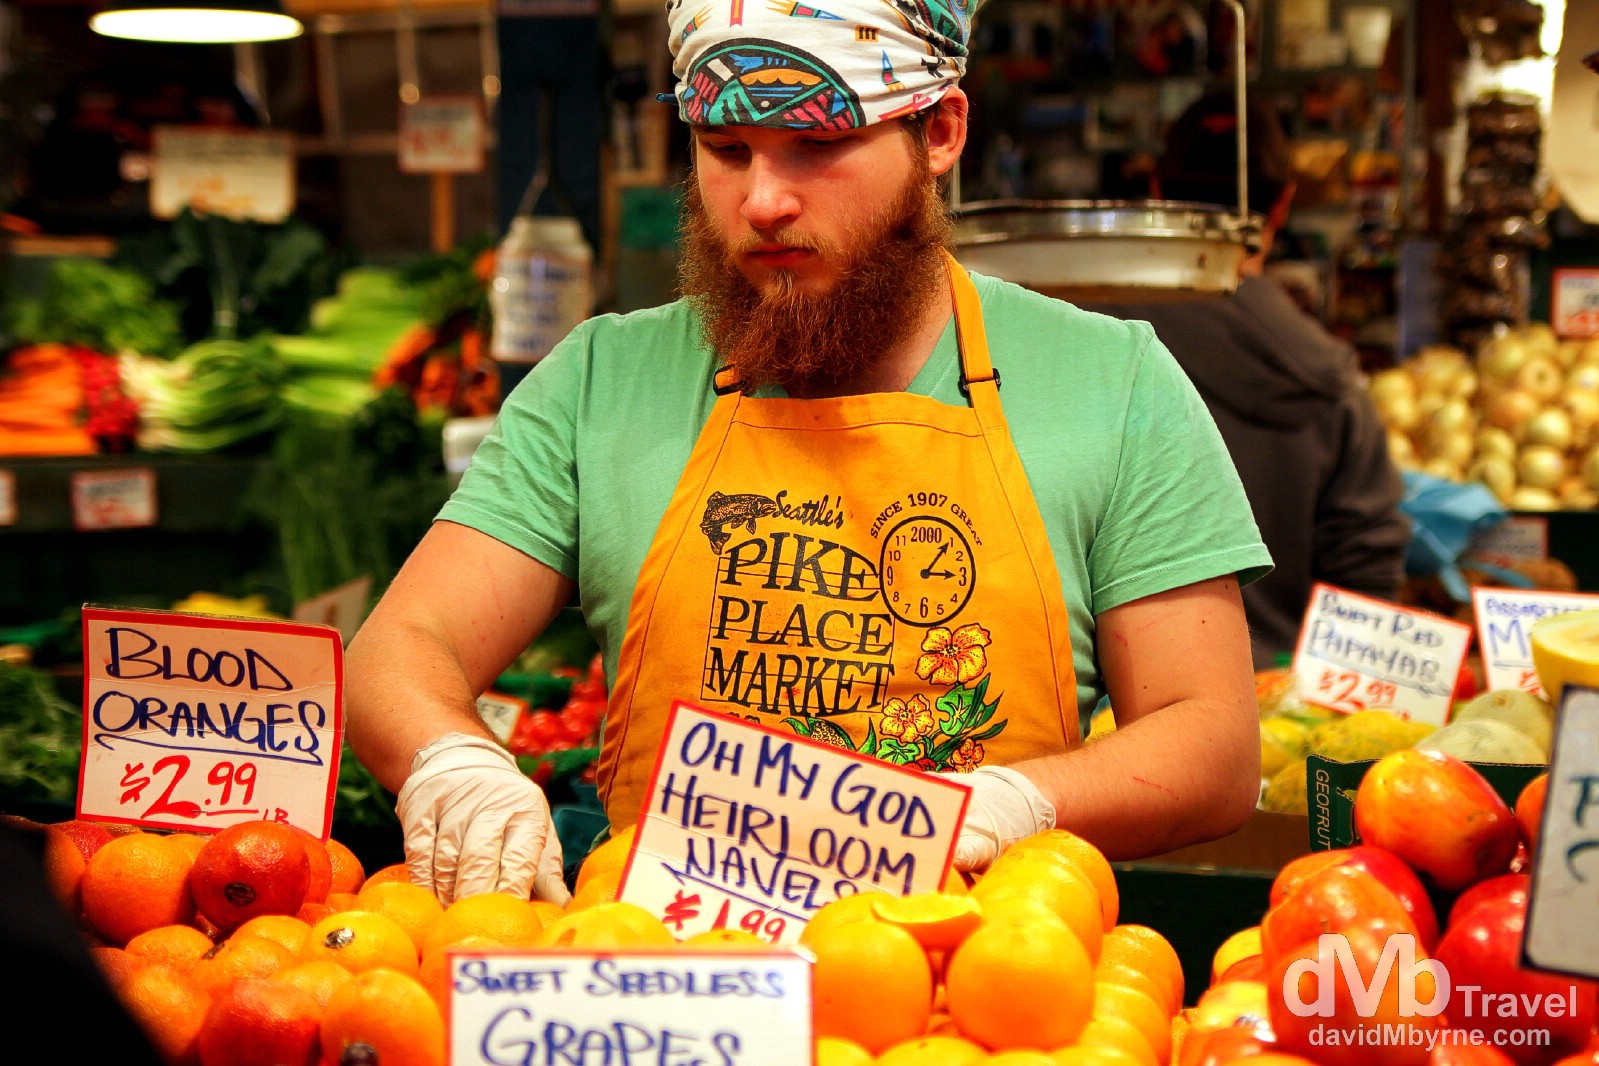 A vendor in Pike Place Market, Seattle, Washington, USA. March 25th 2013.